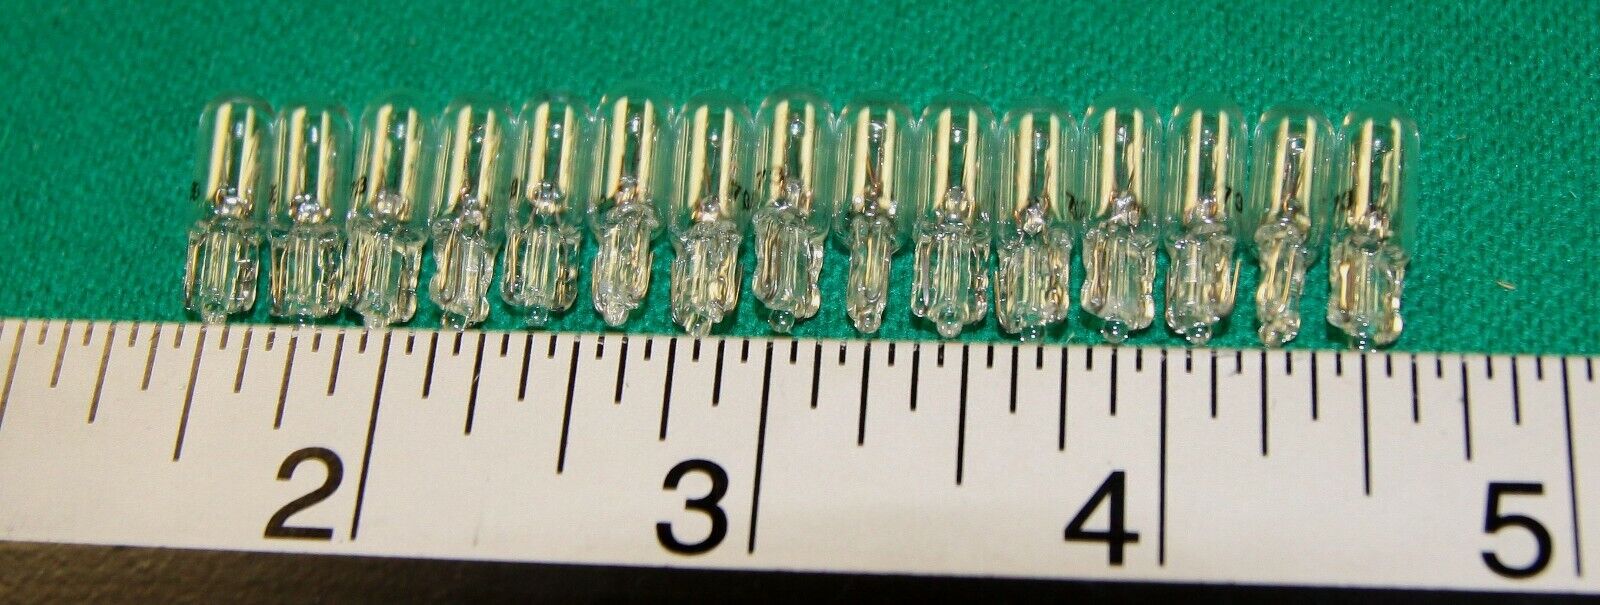 Rowe AMI jukebox # 73 bayonet bulb lamp replacements - qty. 15 for 1 price - New